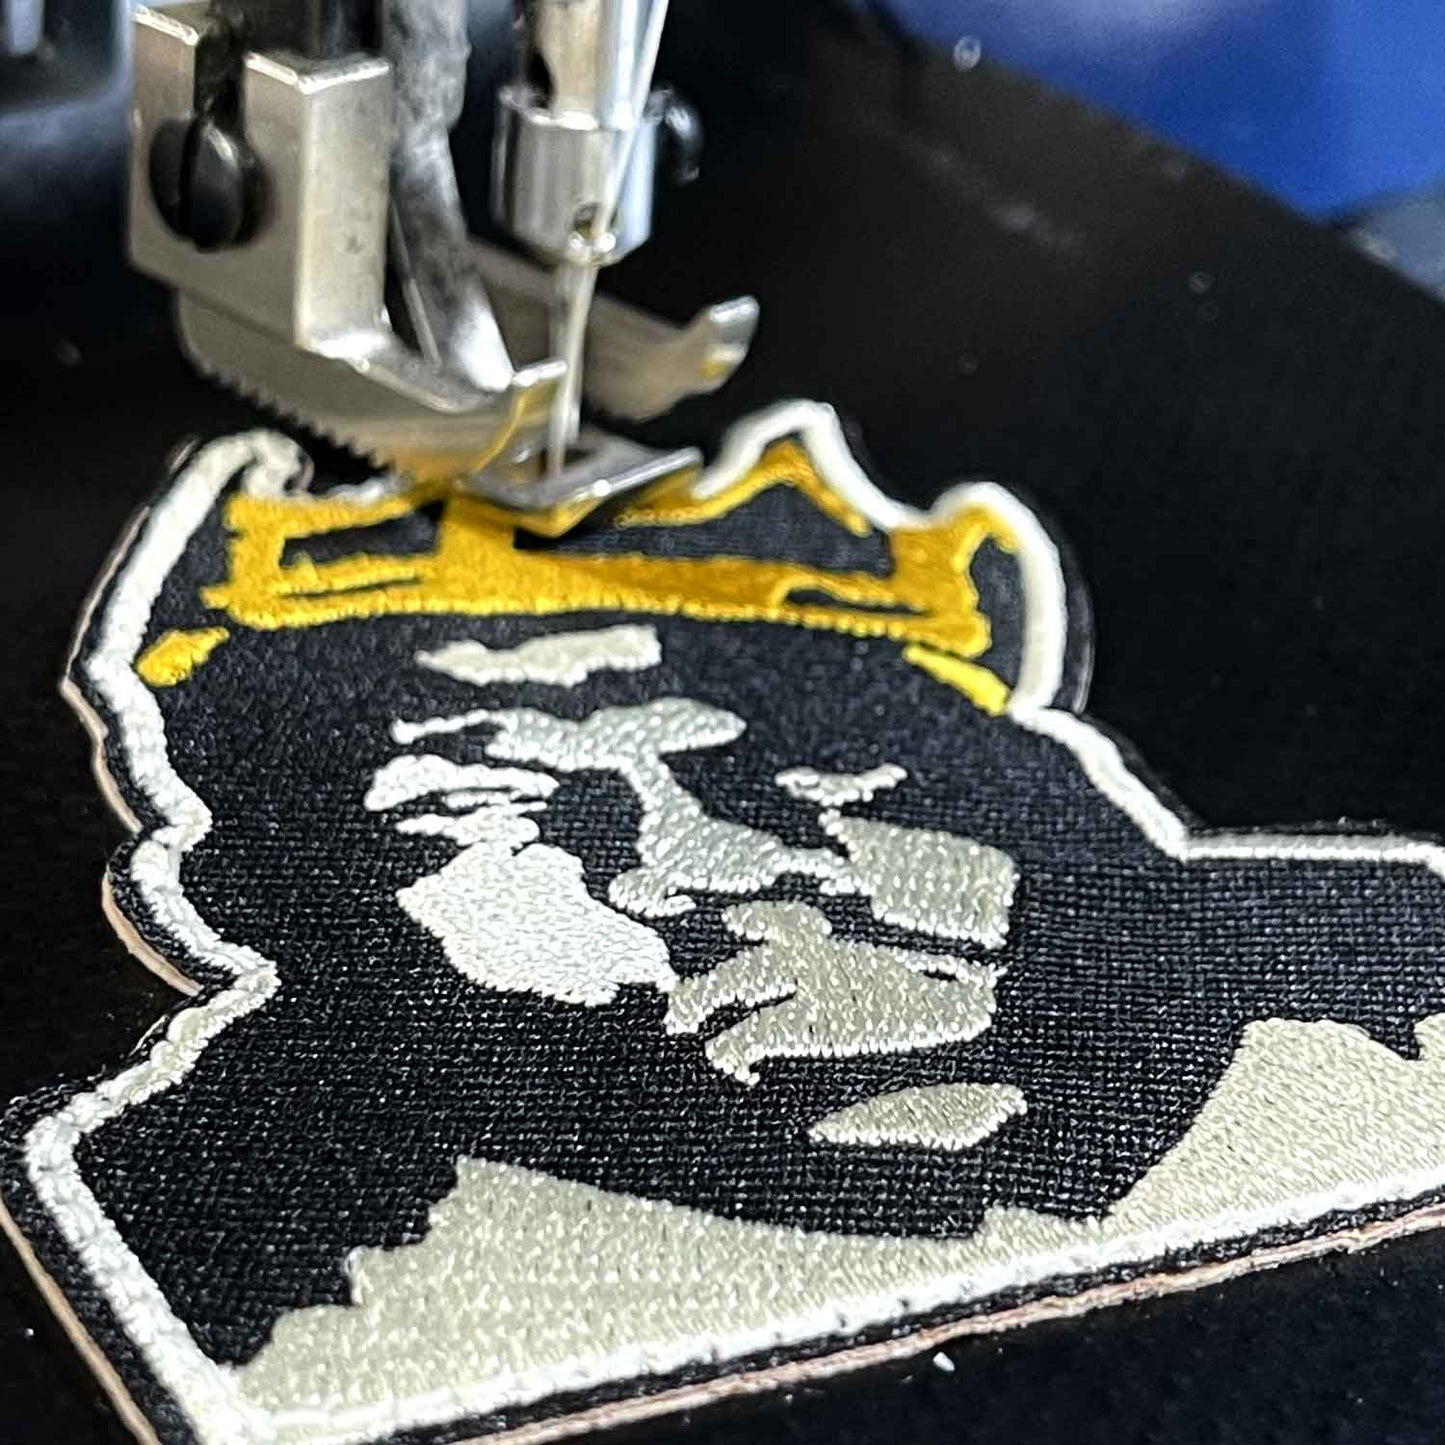 Mail us Your Patch - We'll Sew It On Your New Gear!